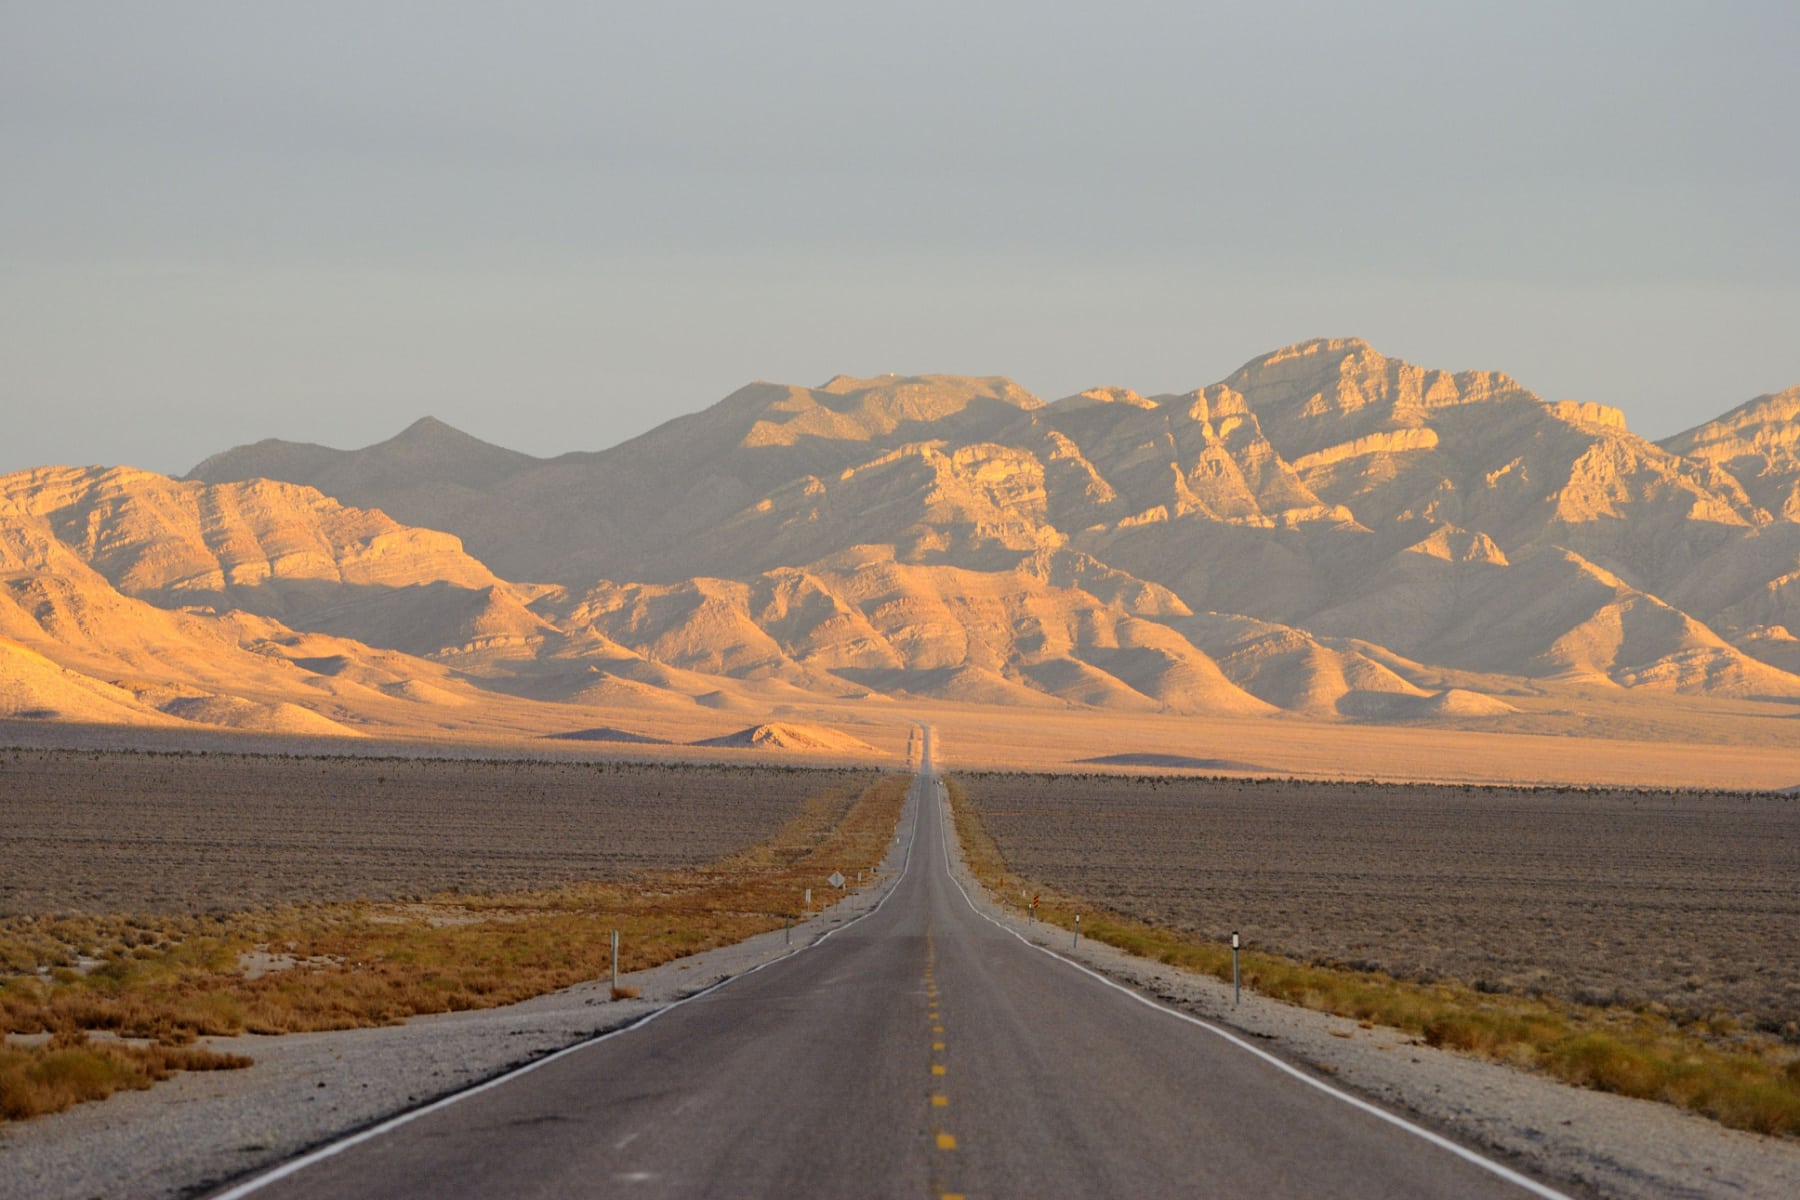 The Extra Terrestrial Highway in Nevada is a long, straight road with desert mountains ahead. 